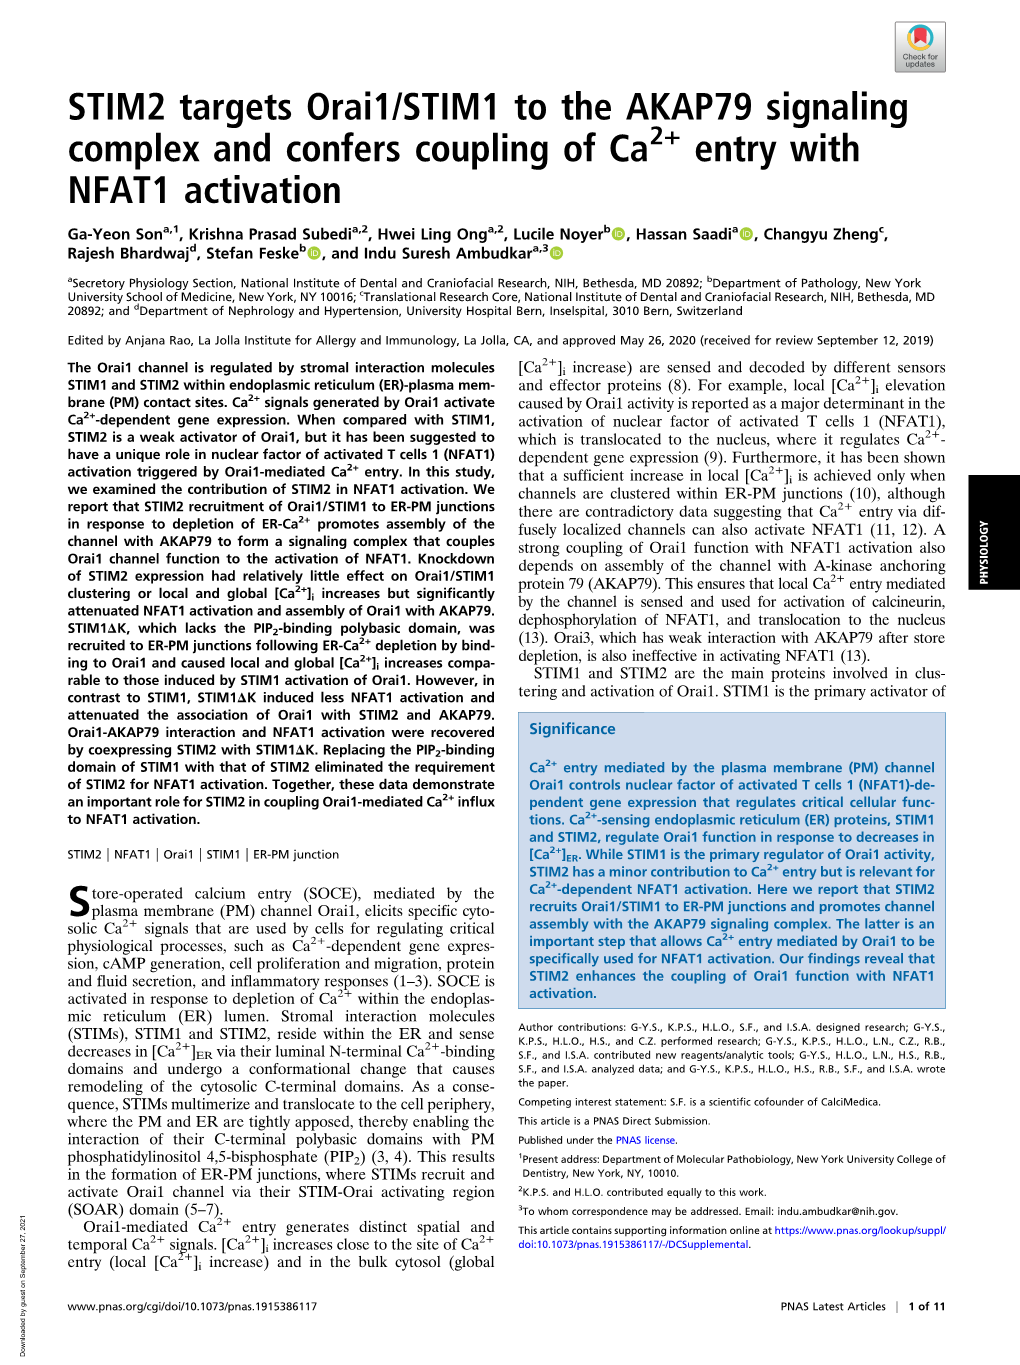 STIM2 Targets Orai1/STIM1 to the AKAP79 Signaling Complex and Confers Coupling of Ca2+ Entry with NFAT1 Activation